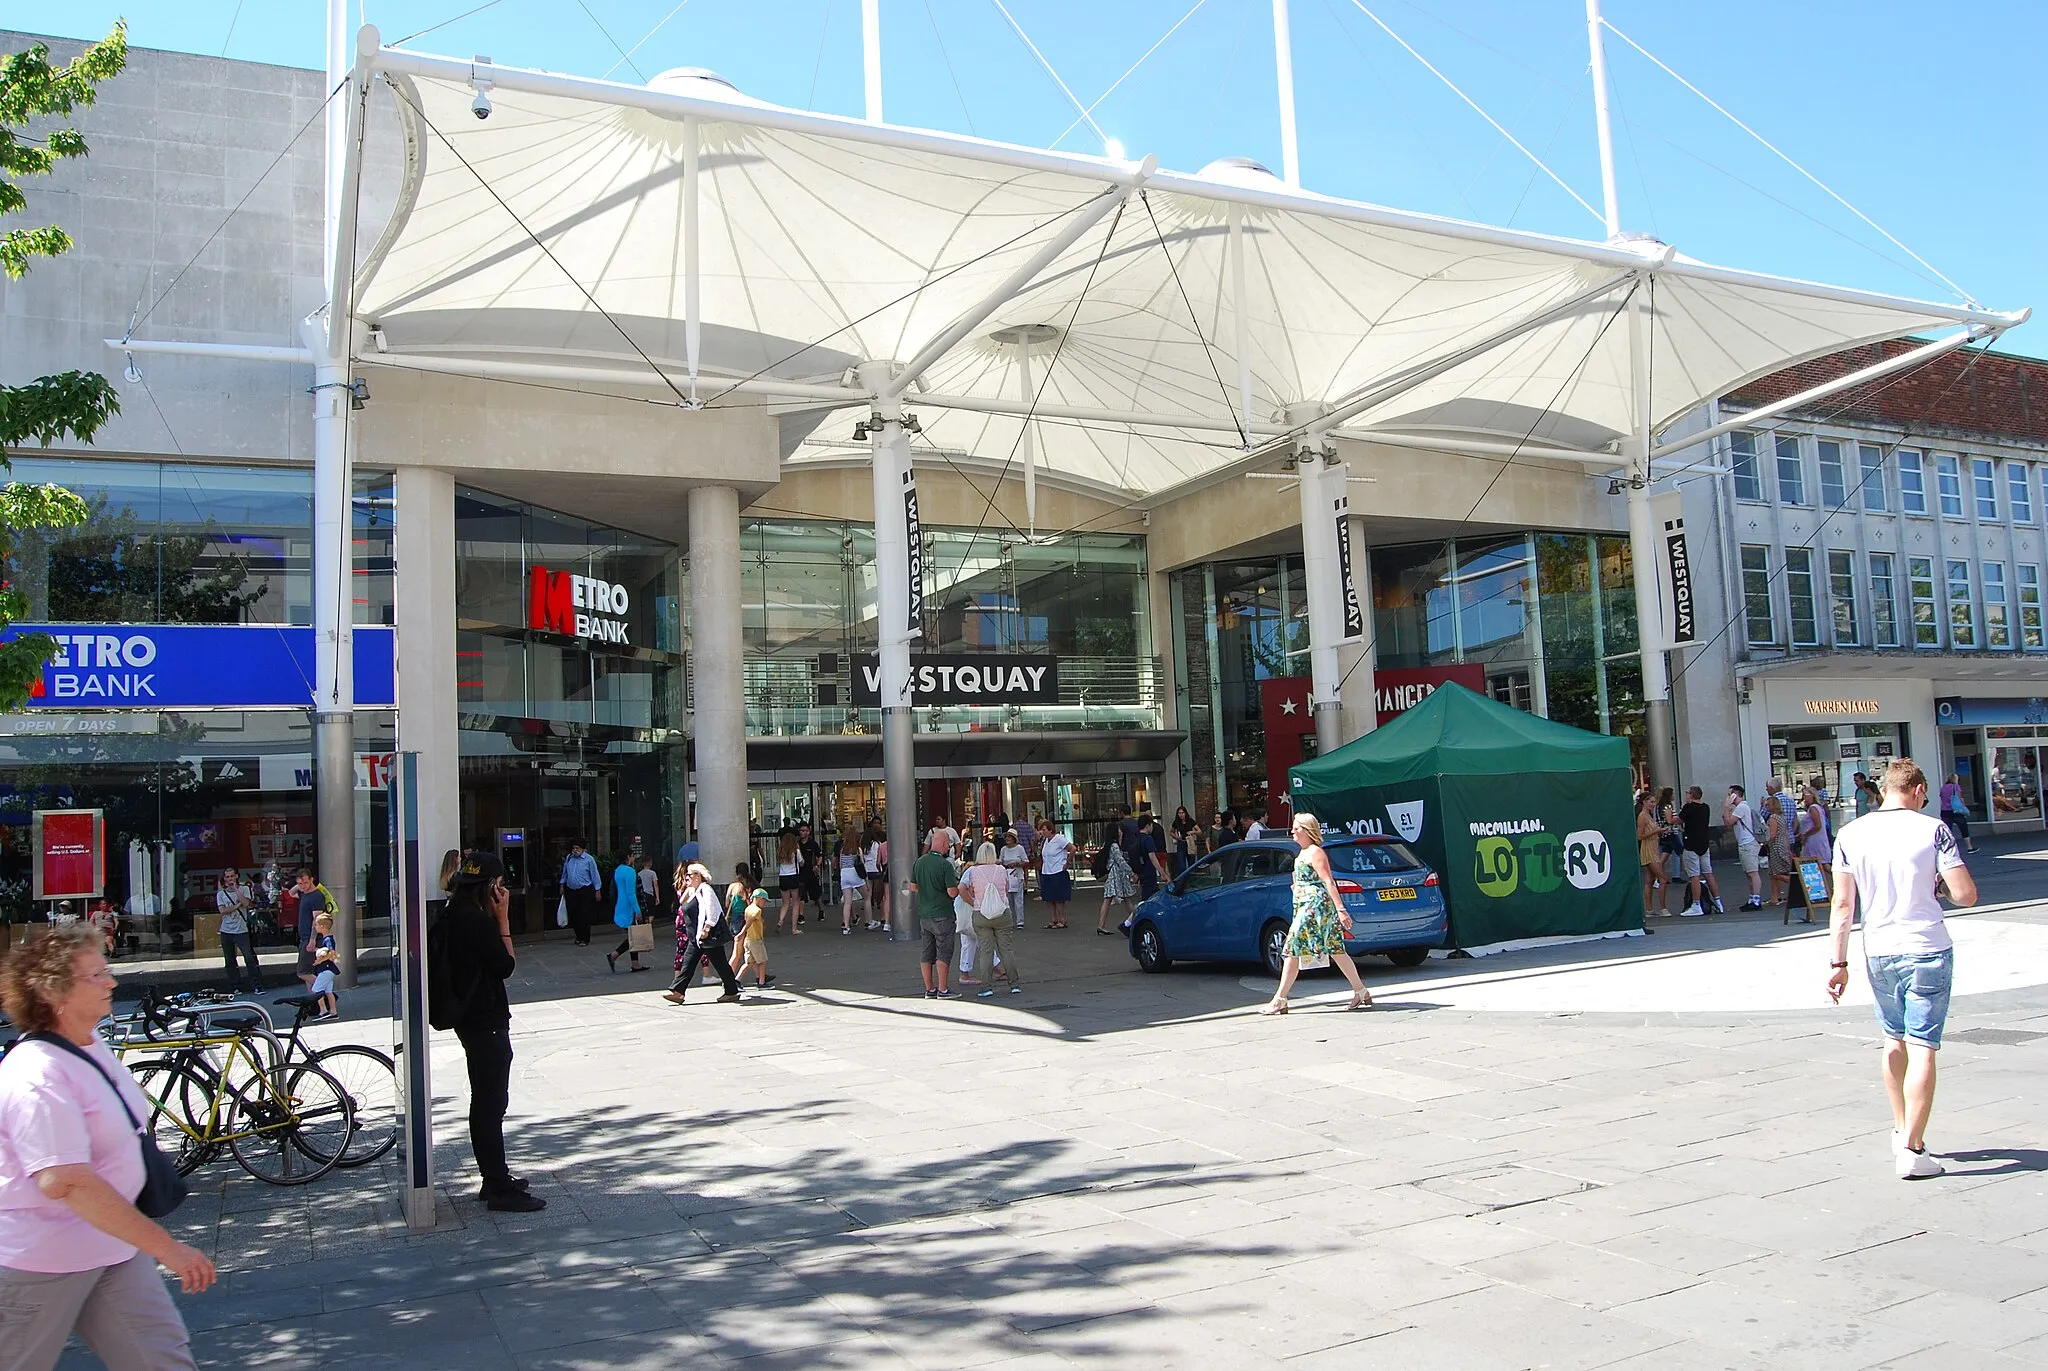 Photo showing: Entrance to Westquay Shopping Centre in Above Bar Street